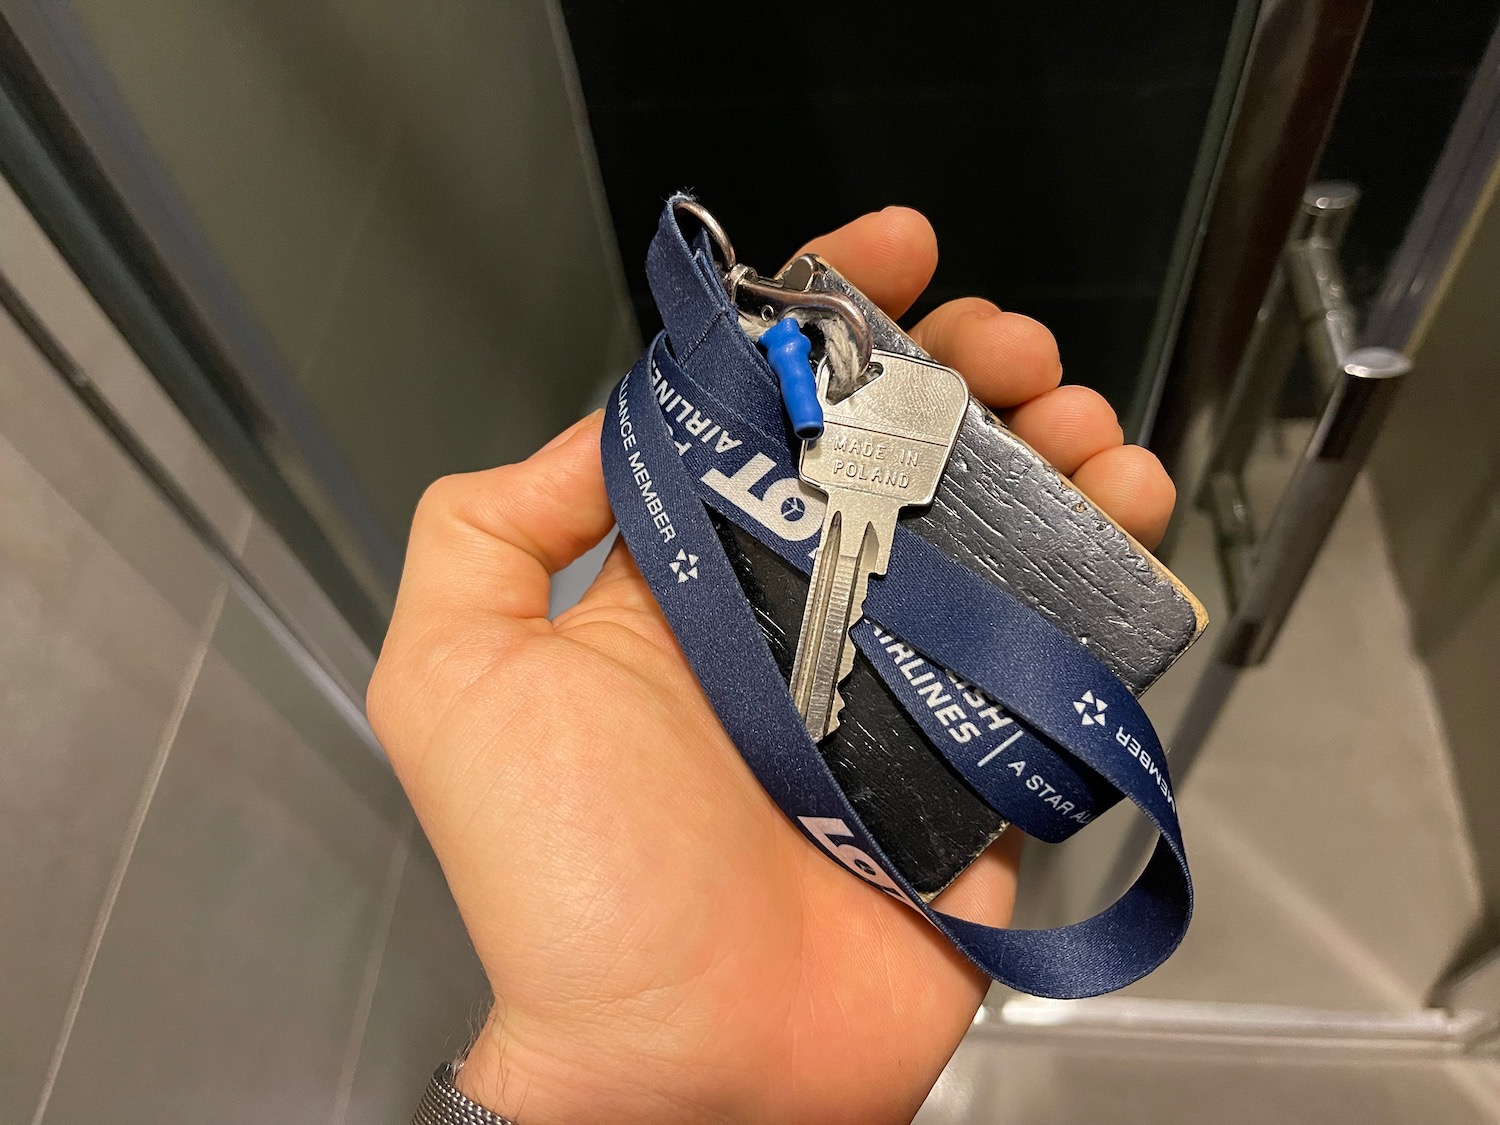 a hand holding a key chain